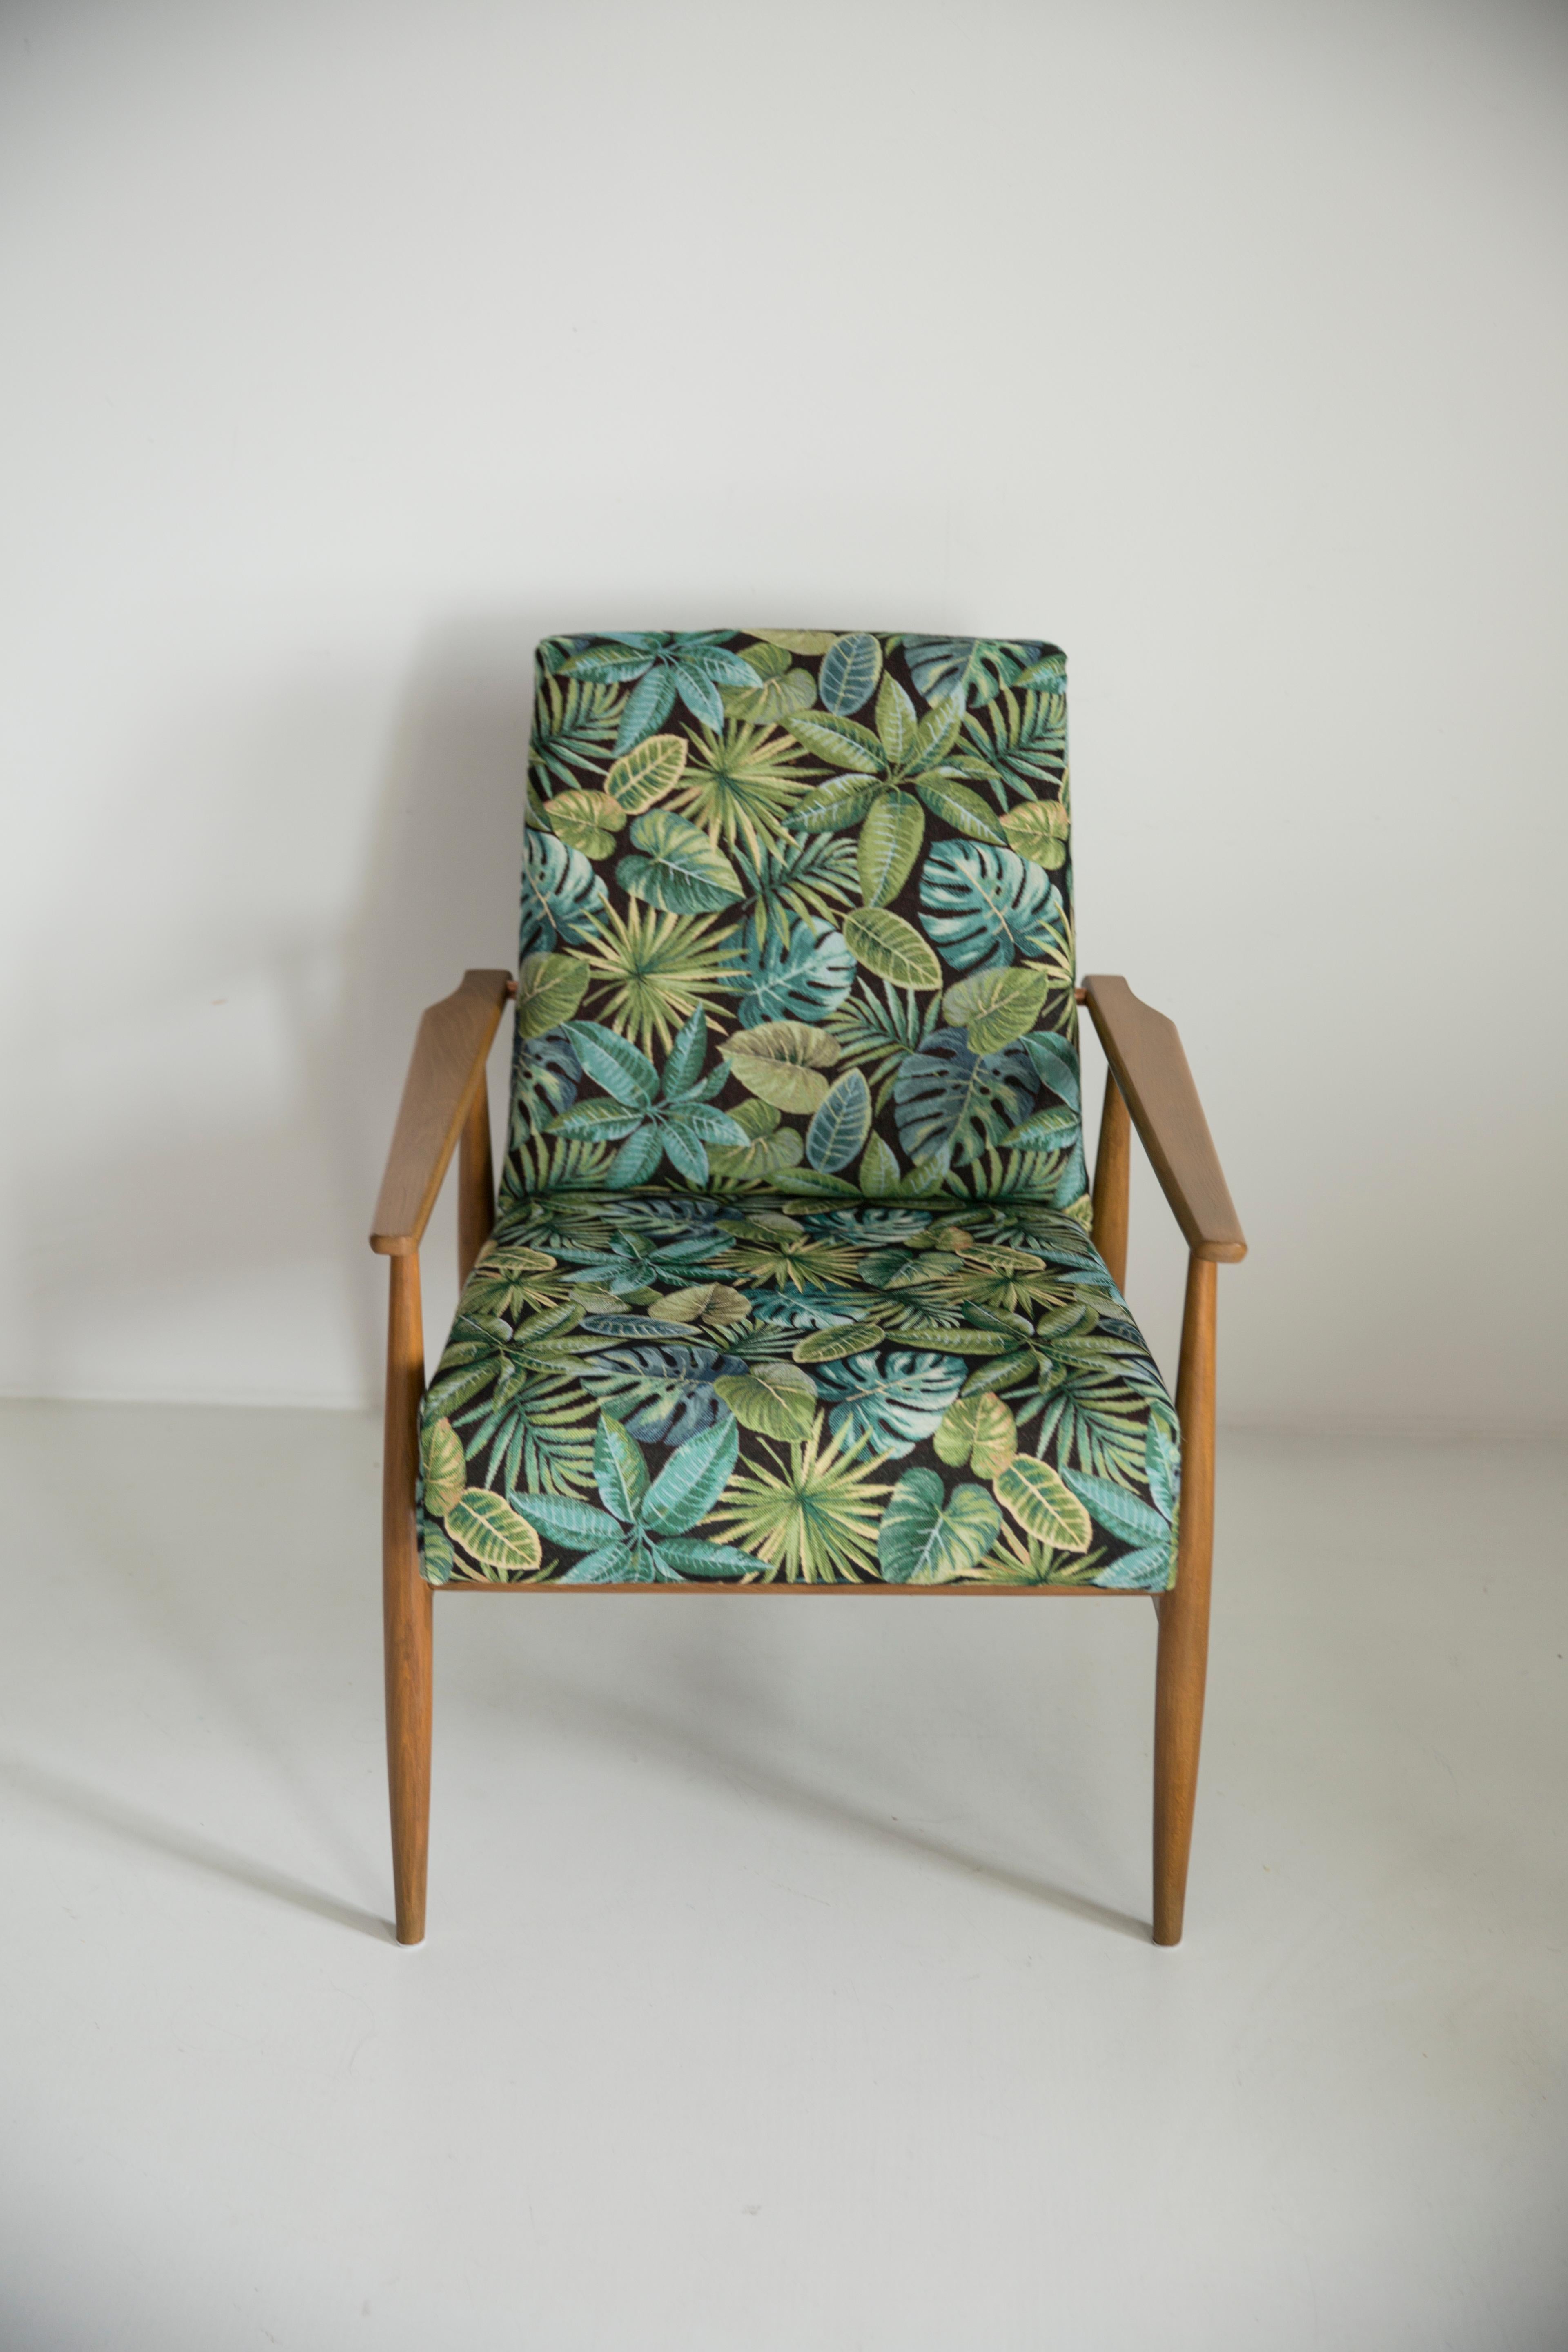 Hand-Crafted Pair of Mid-Century Green Leaves Jacquard Dante Armchairs, H. Lis, 1960s For Sale